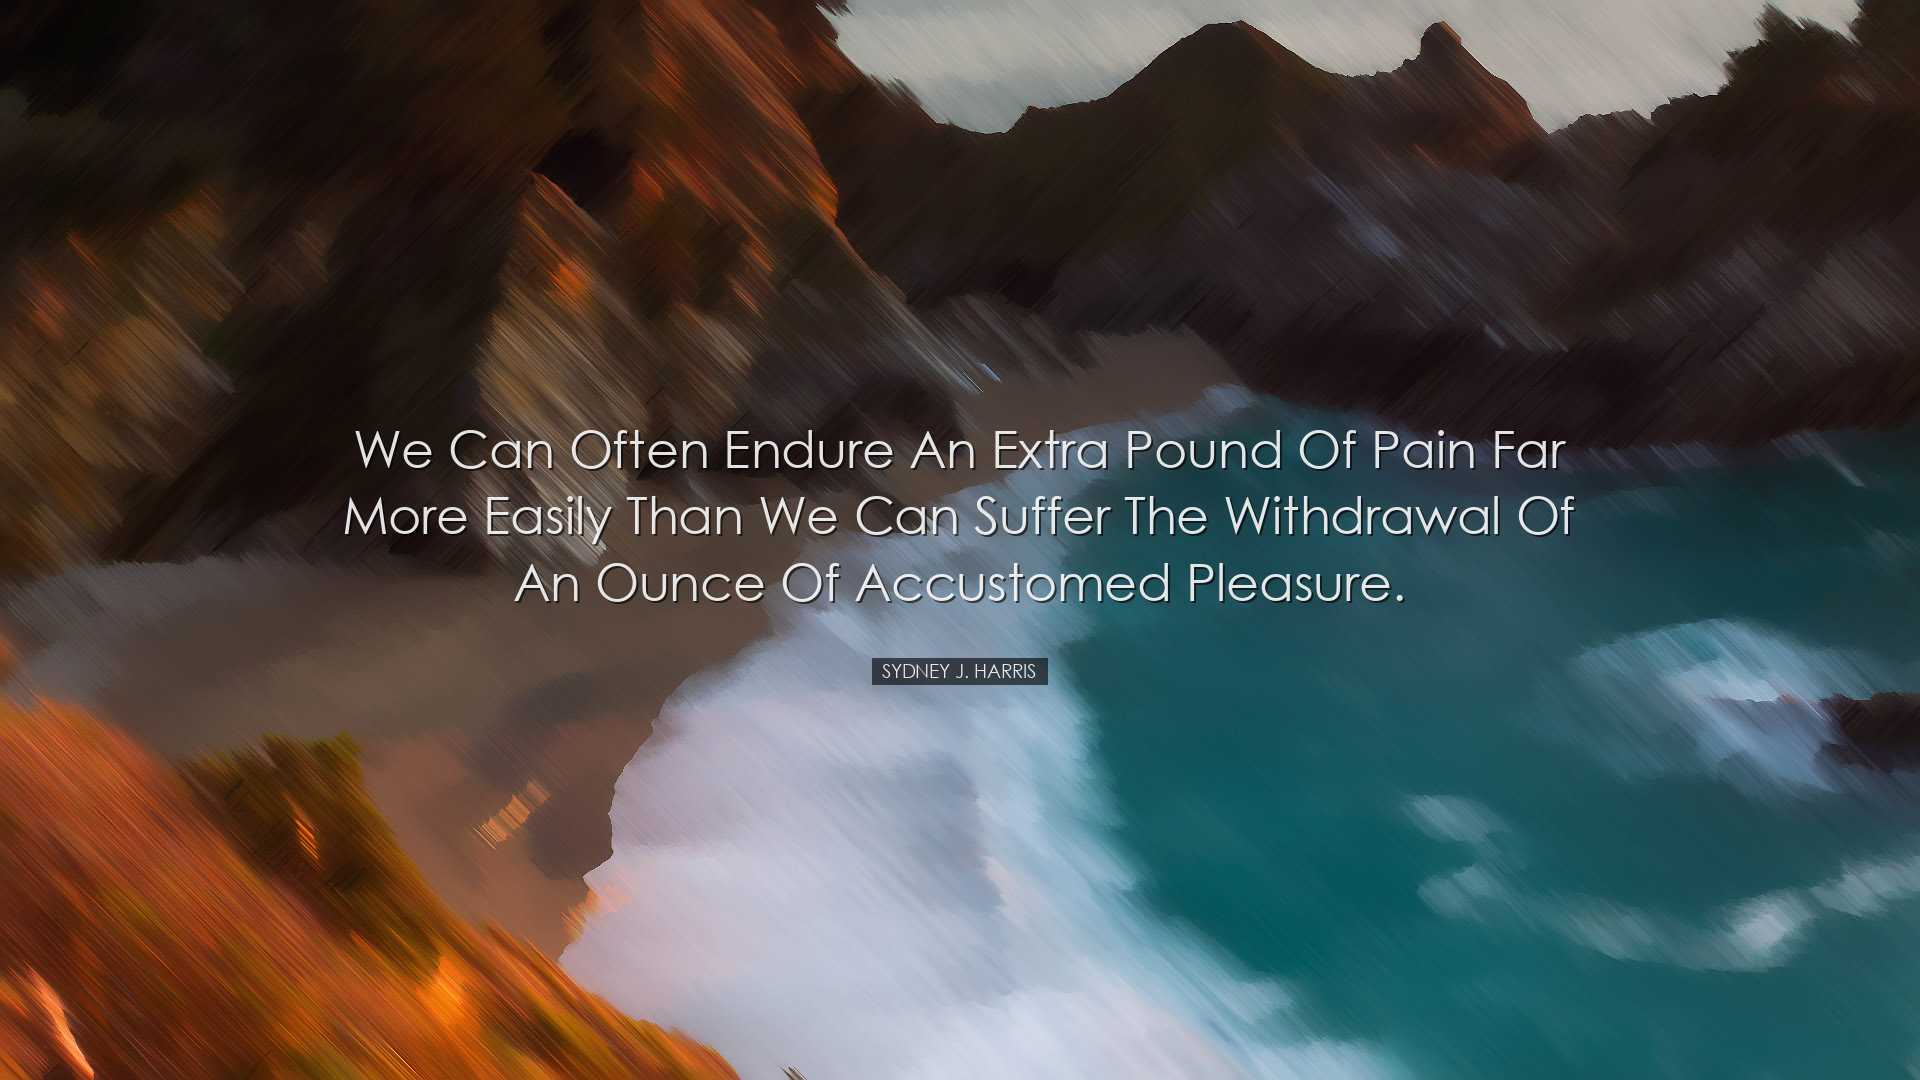 We can often endure an extra pound of pain far more easily than we